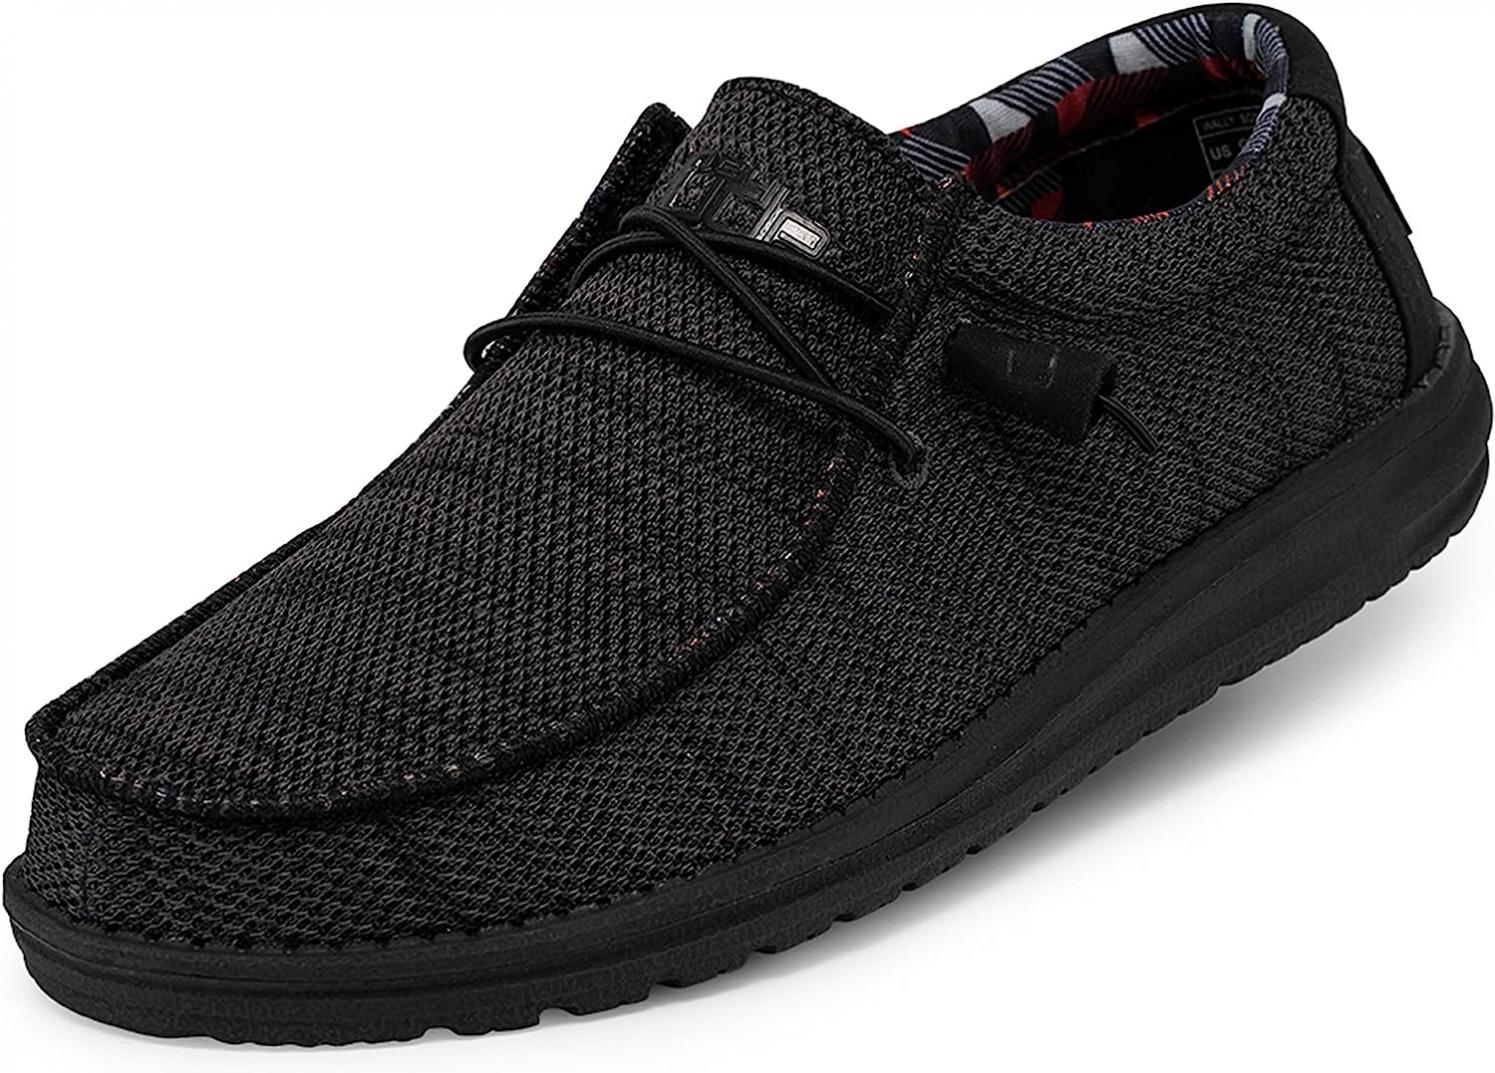 Hey Dude Men's Wally Sox Jet Black Size 11 | Men’s Shoes | Men's Lace Up Loafers | Comfortable & Light-Weight